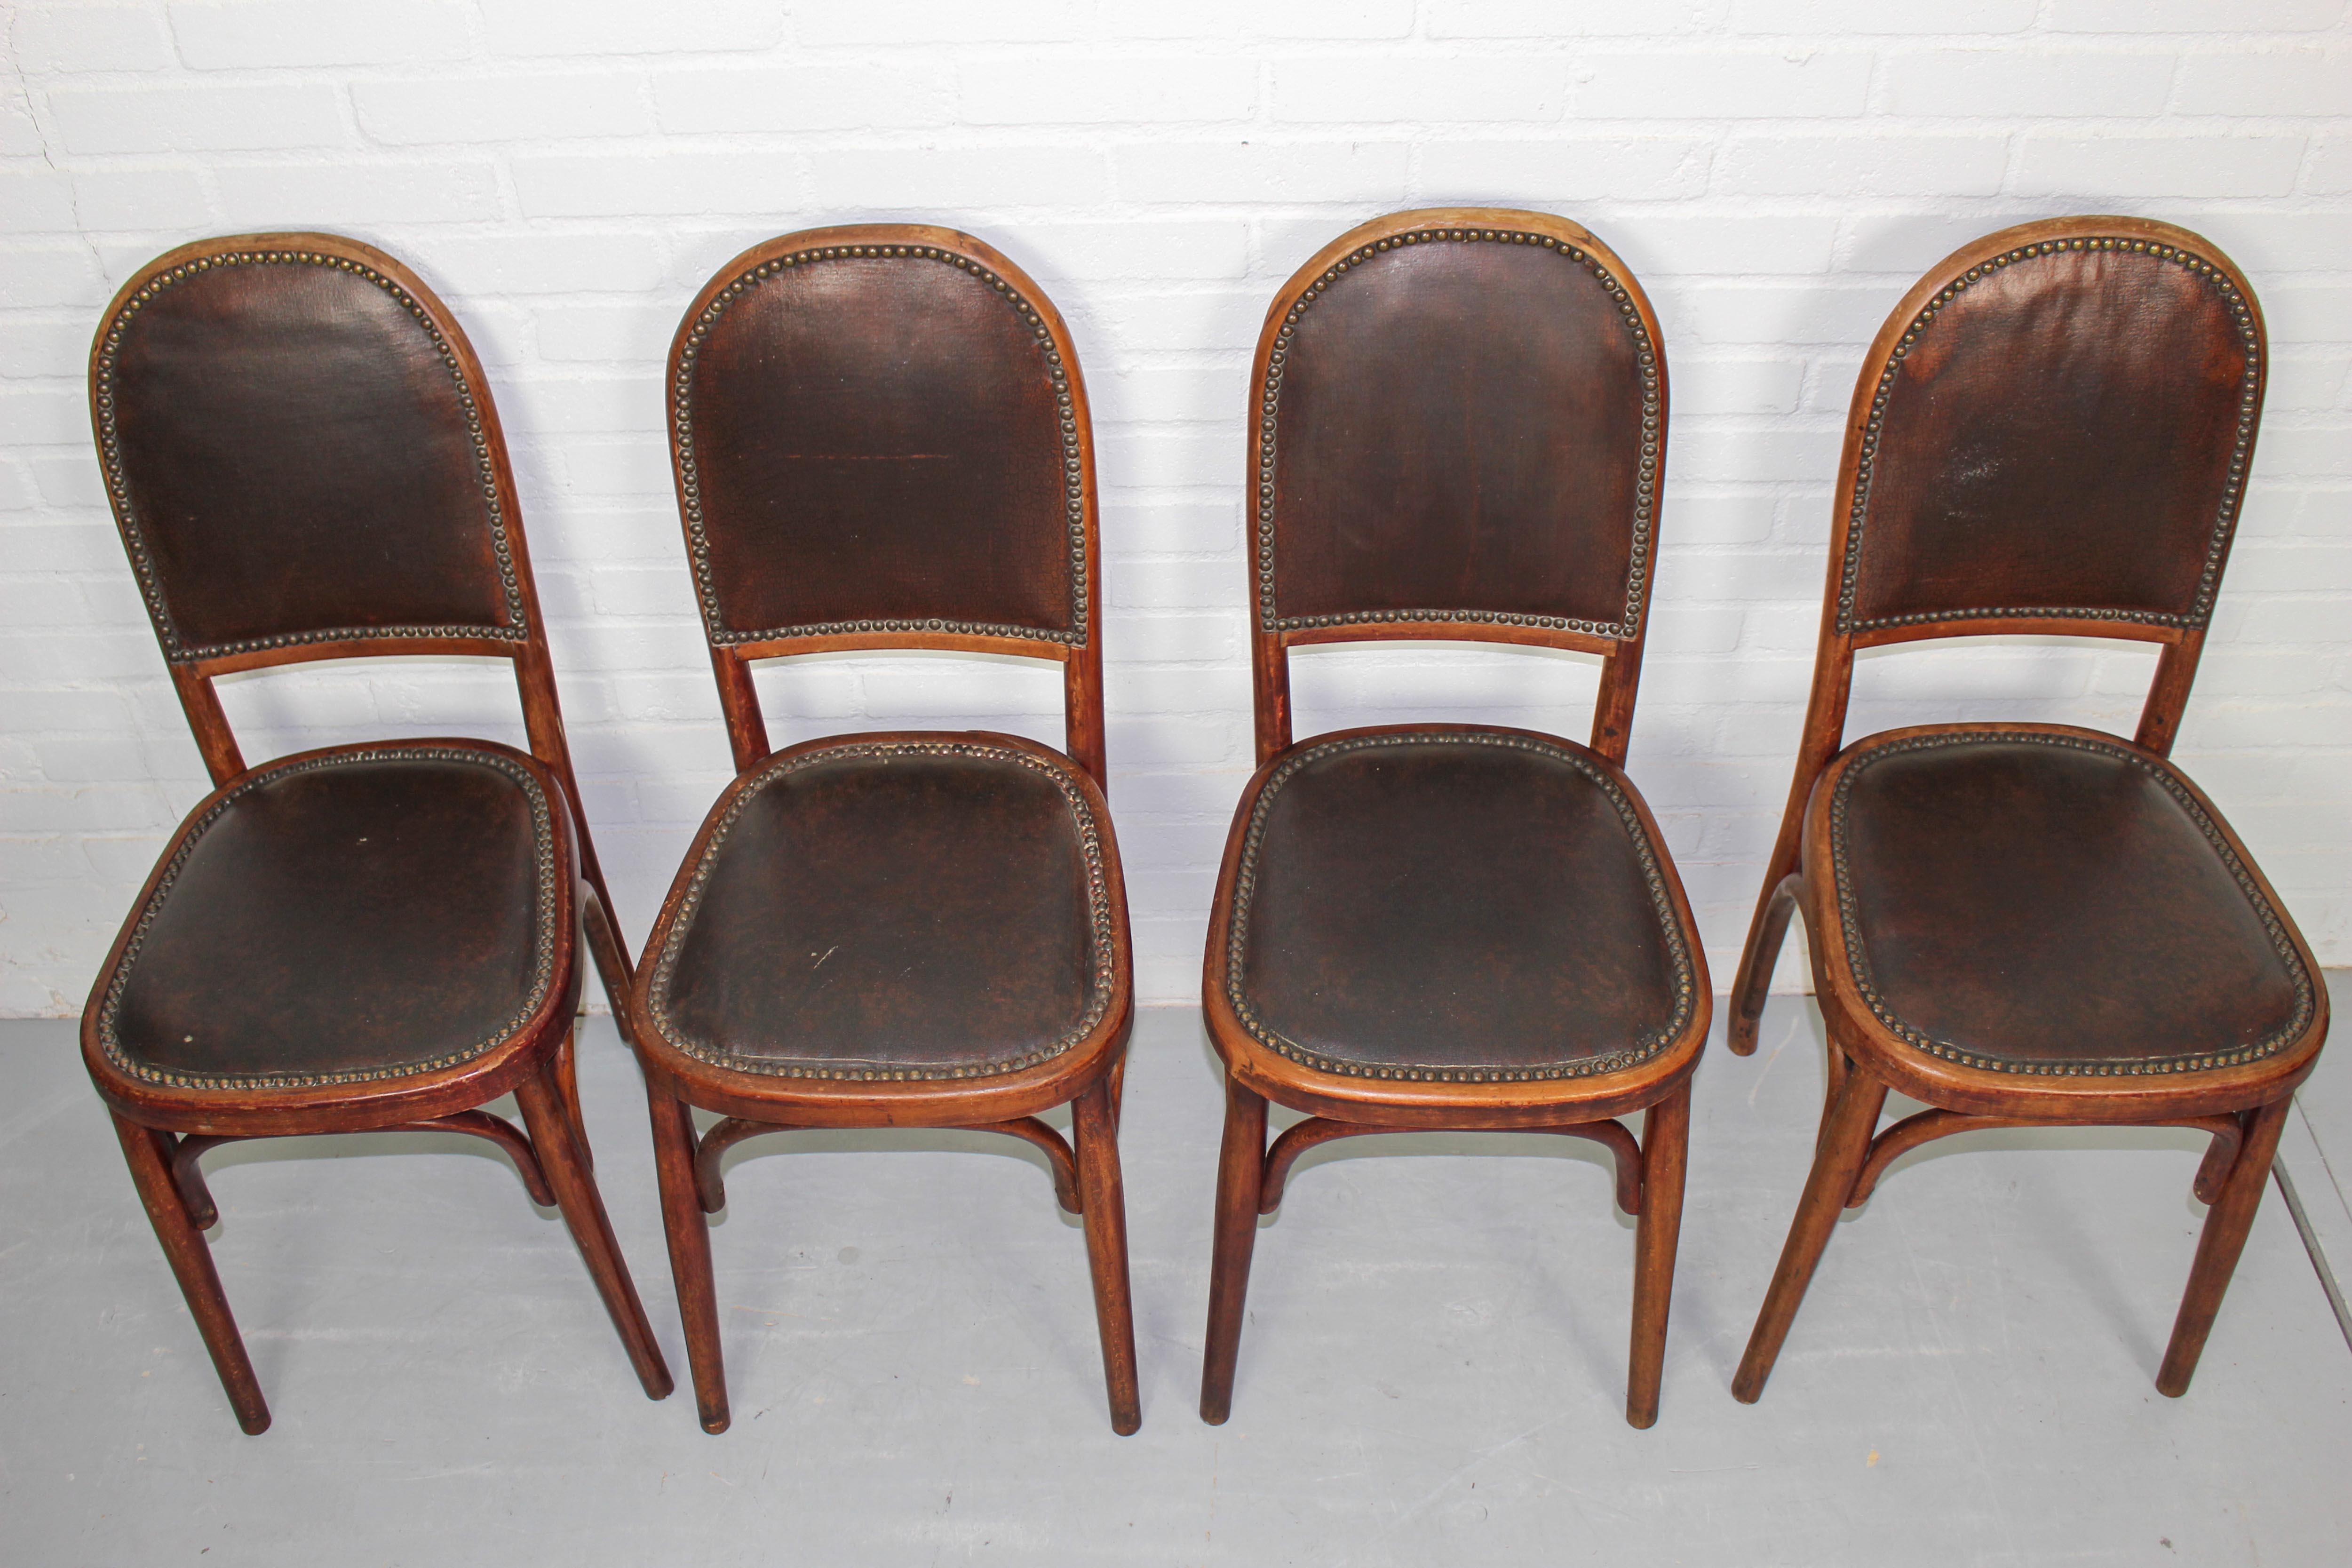  Art Nouveau Bentwood and Leather Dining Room Set from Fischel, c1910 For Sale 4